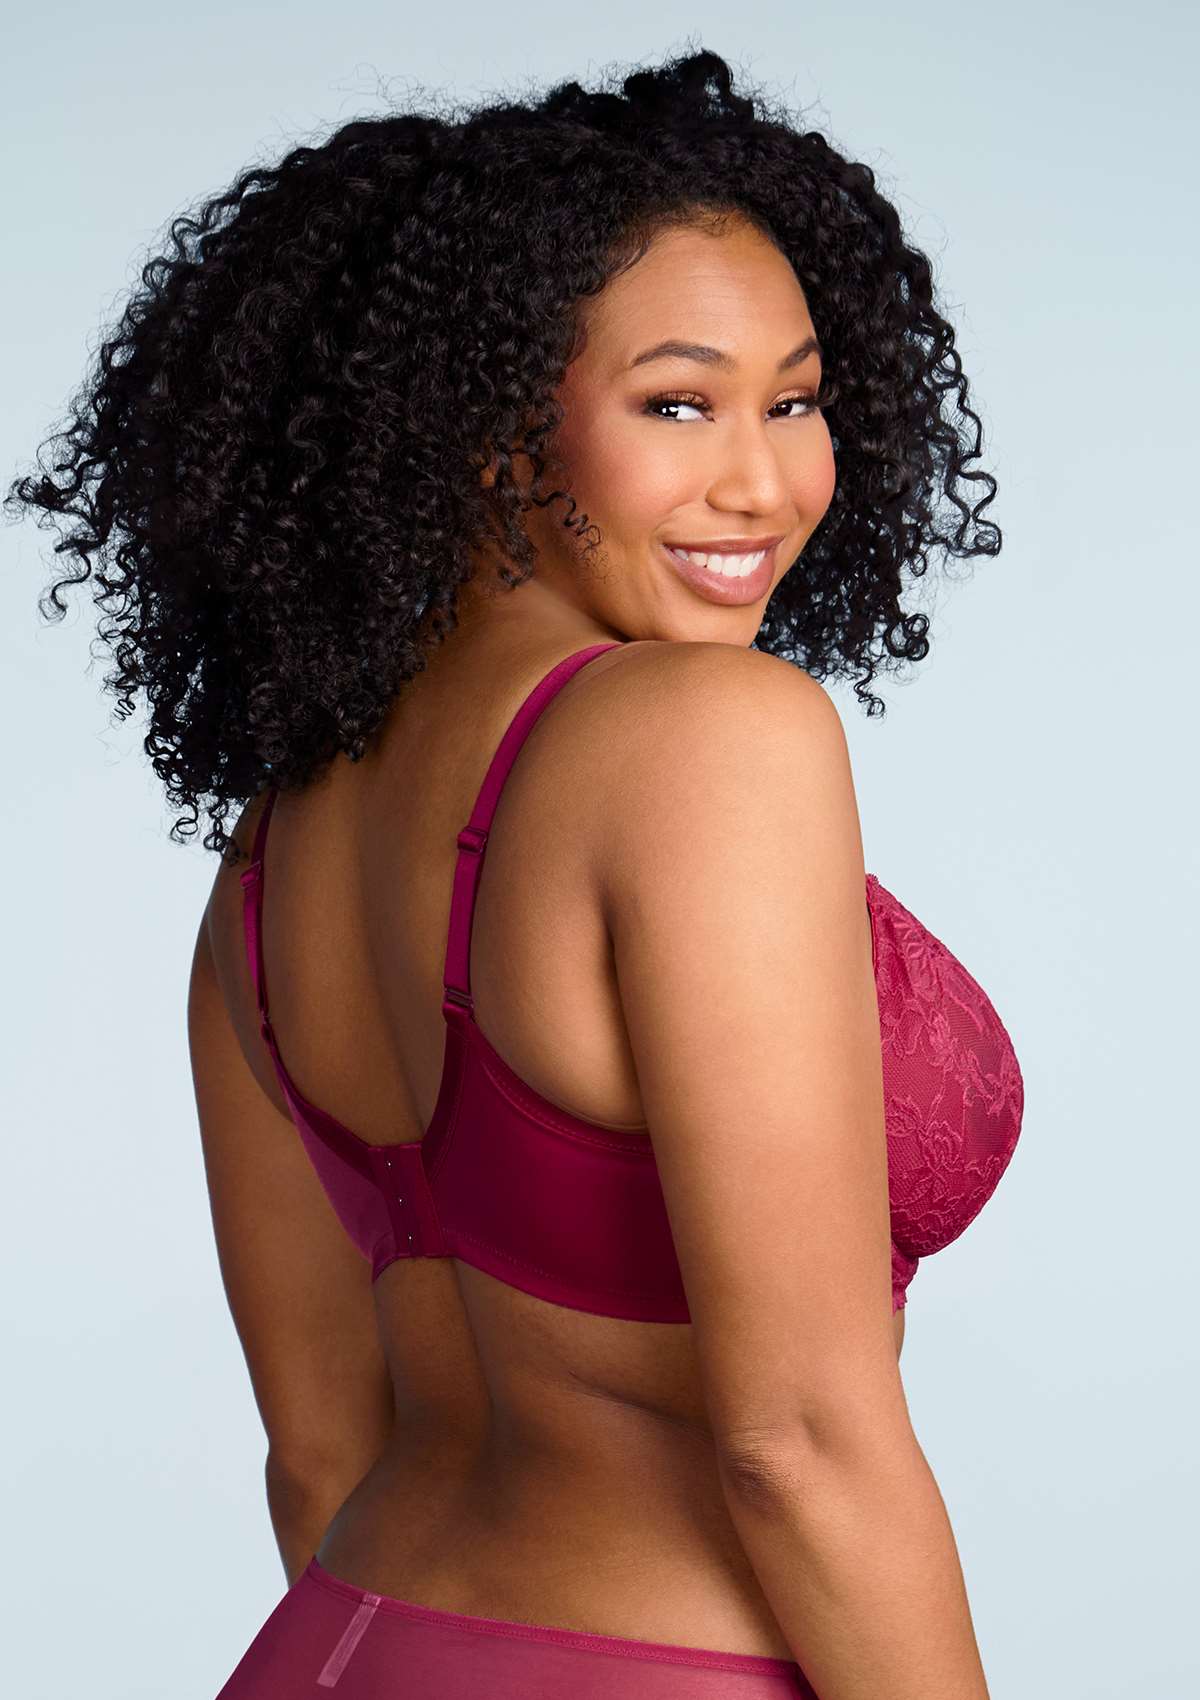 HSIA Pretty In Petals Sexy Lace Bra: Full Coverage Back Smoothing Bra - Red / 42 / I